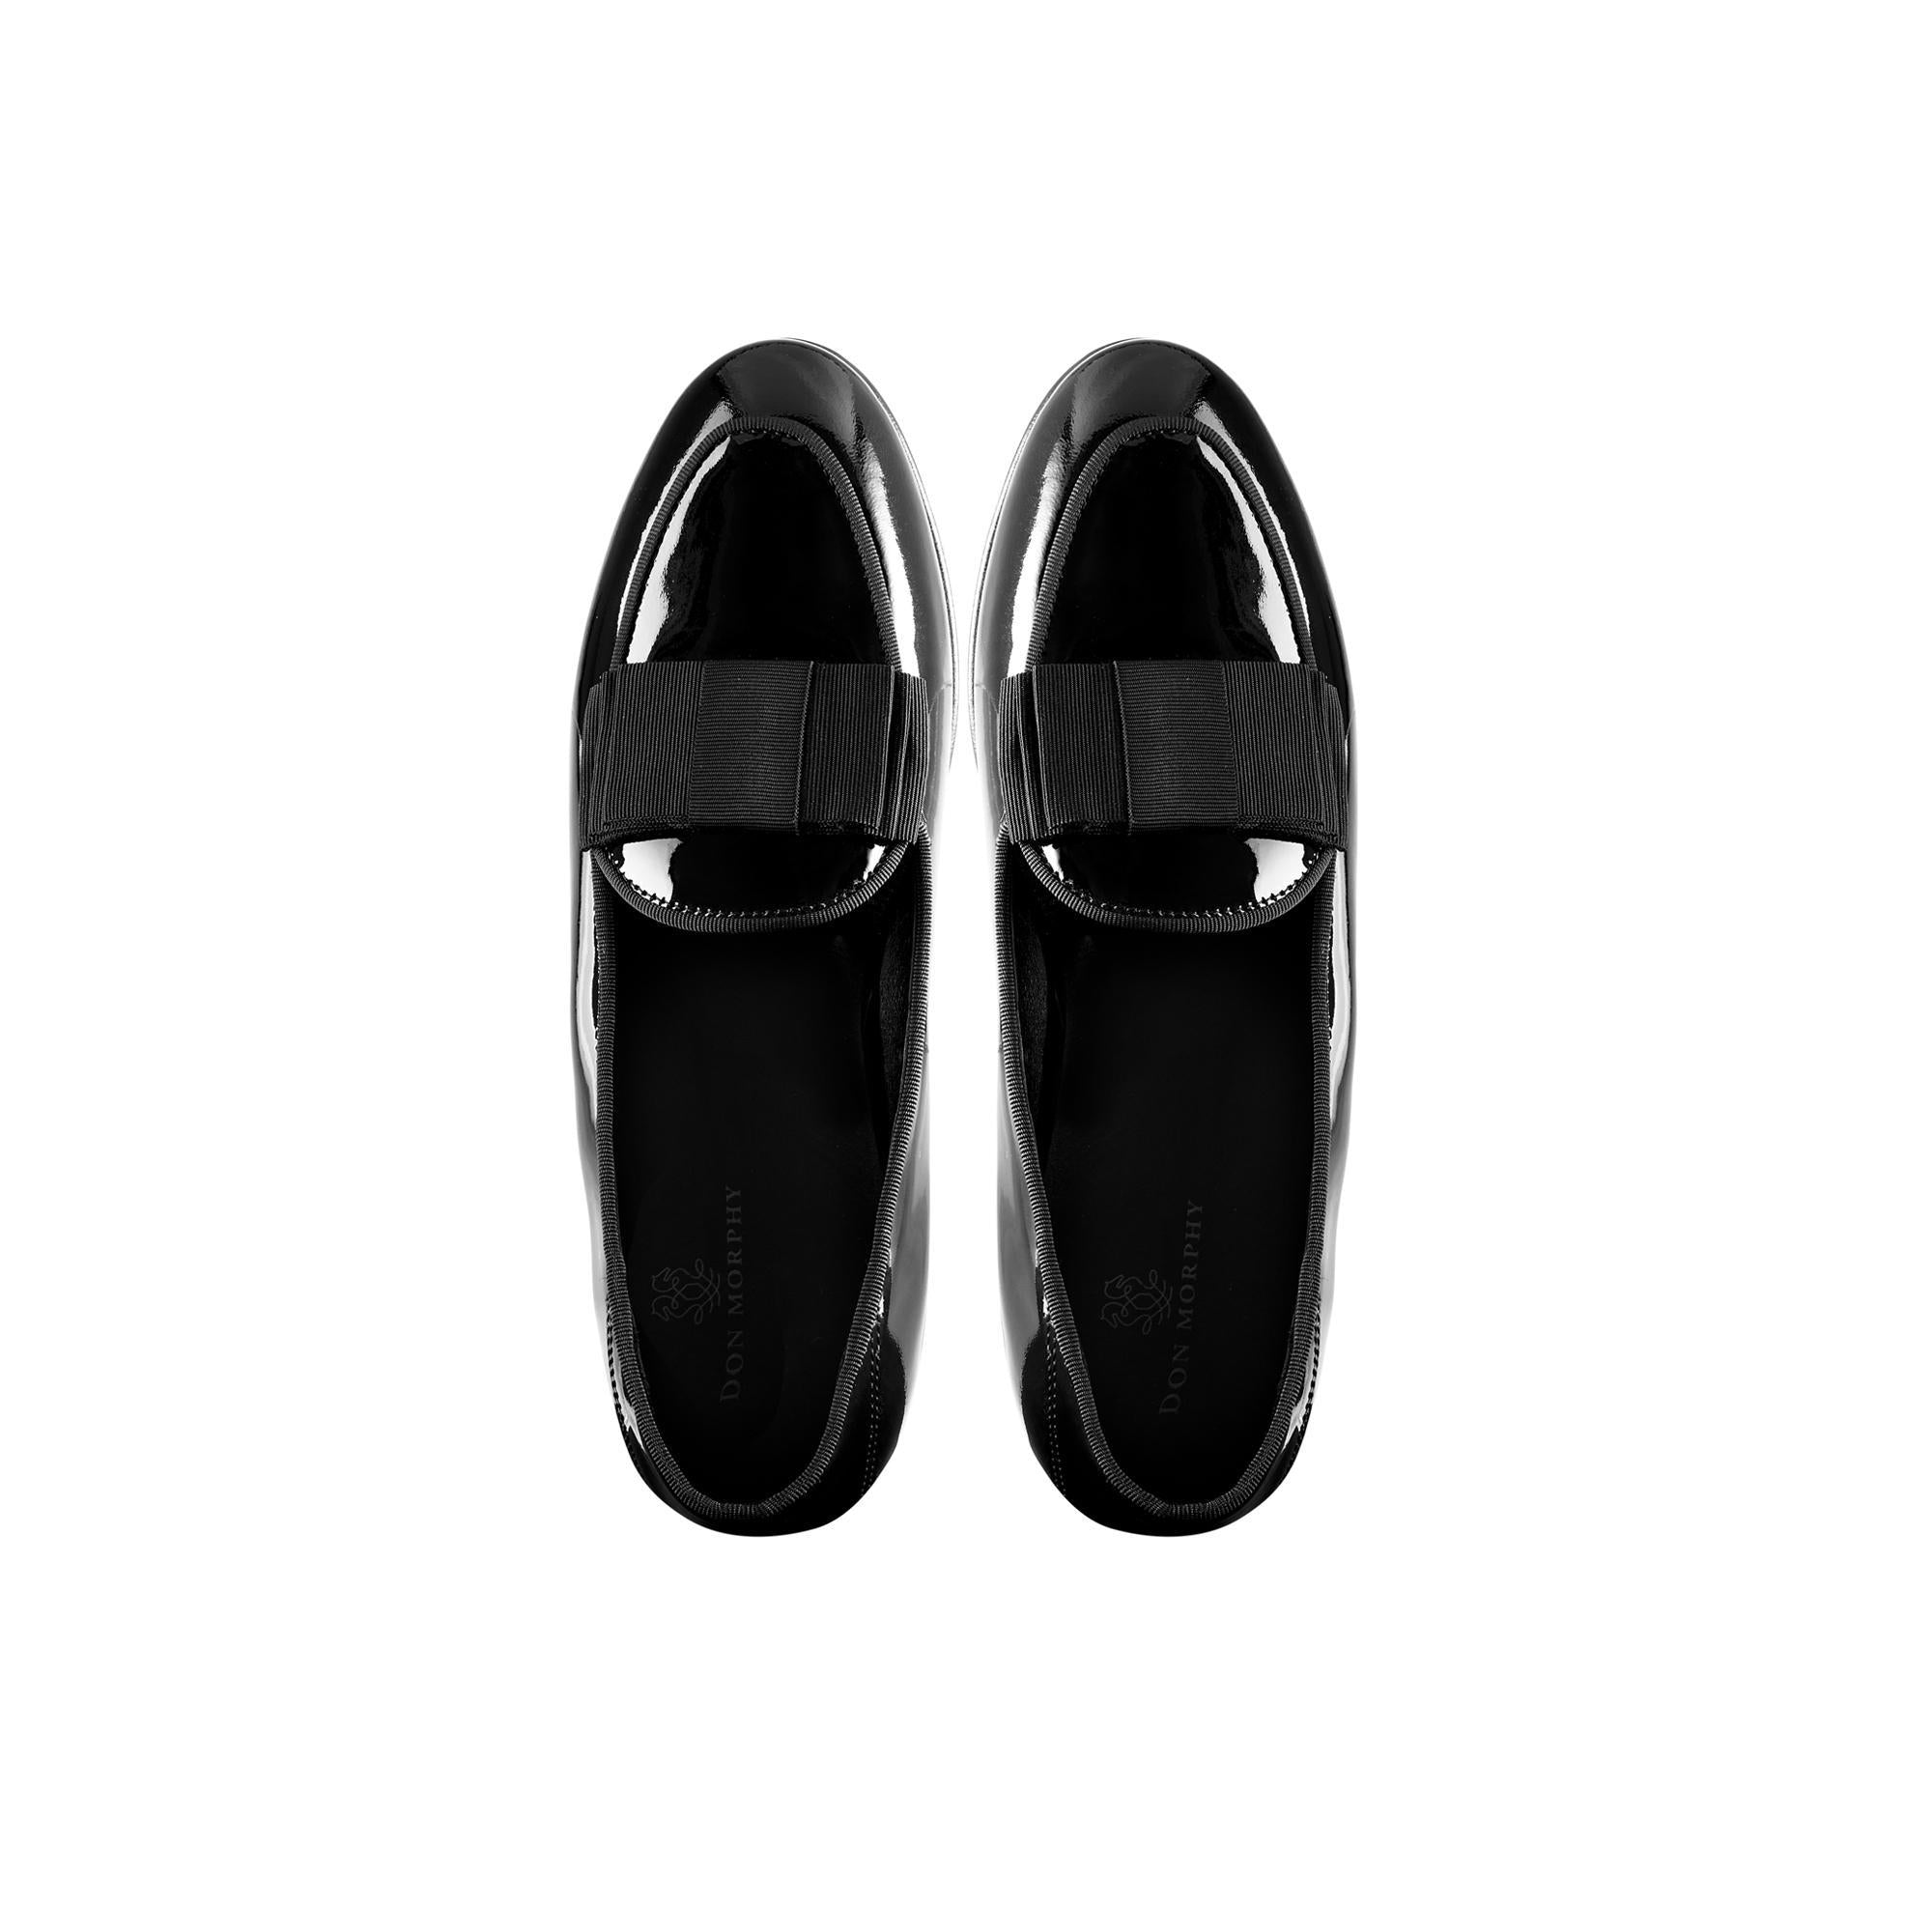 Patent Loafer with Strap